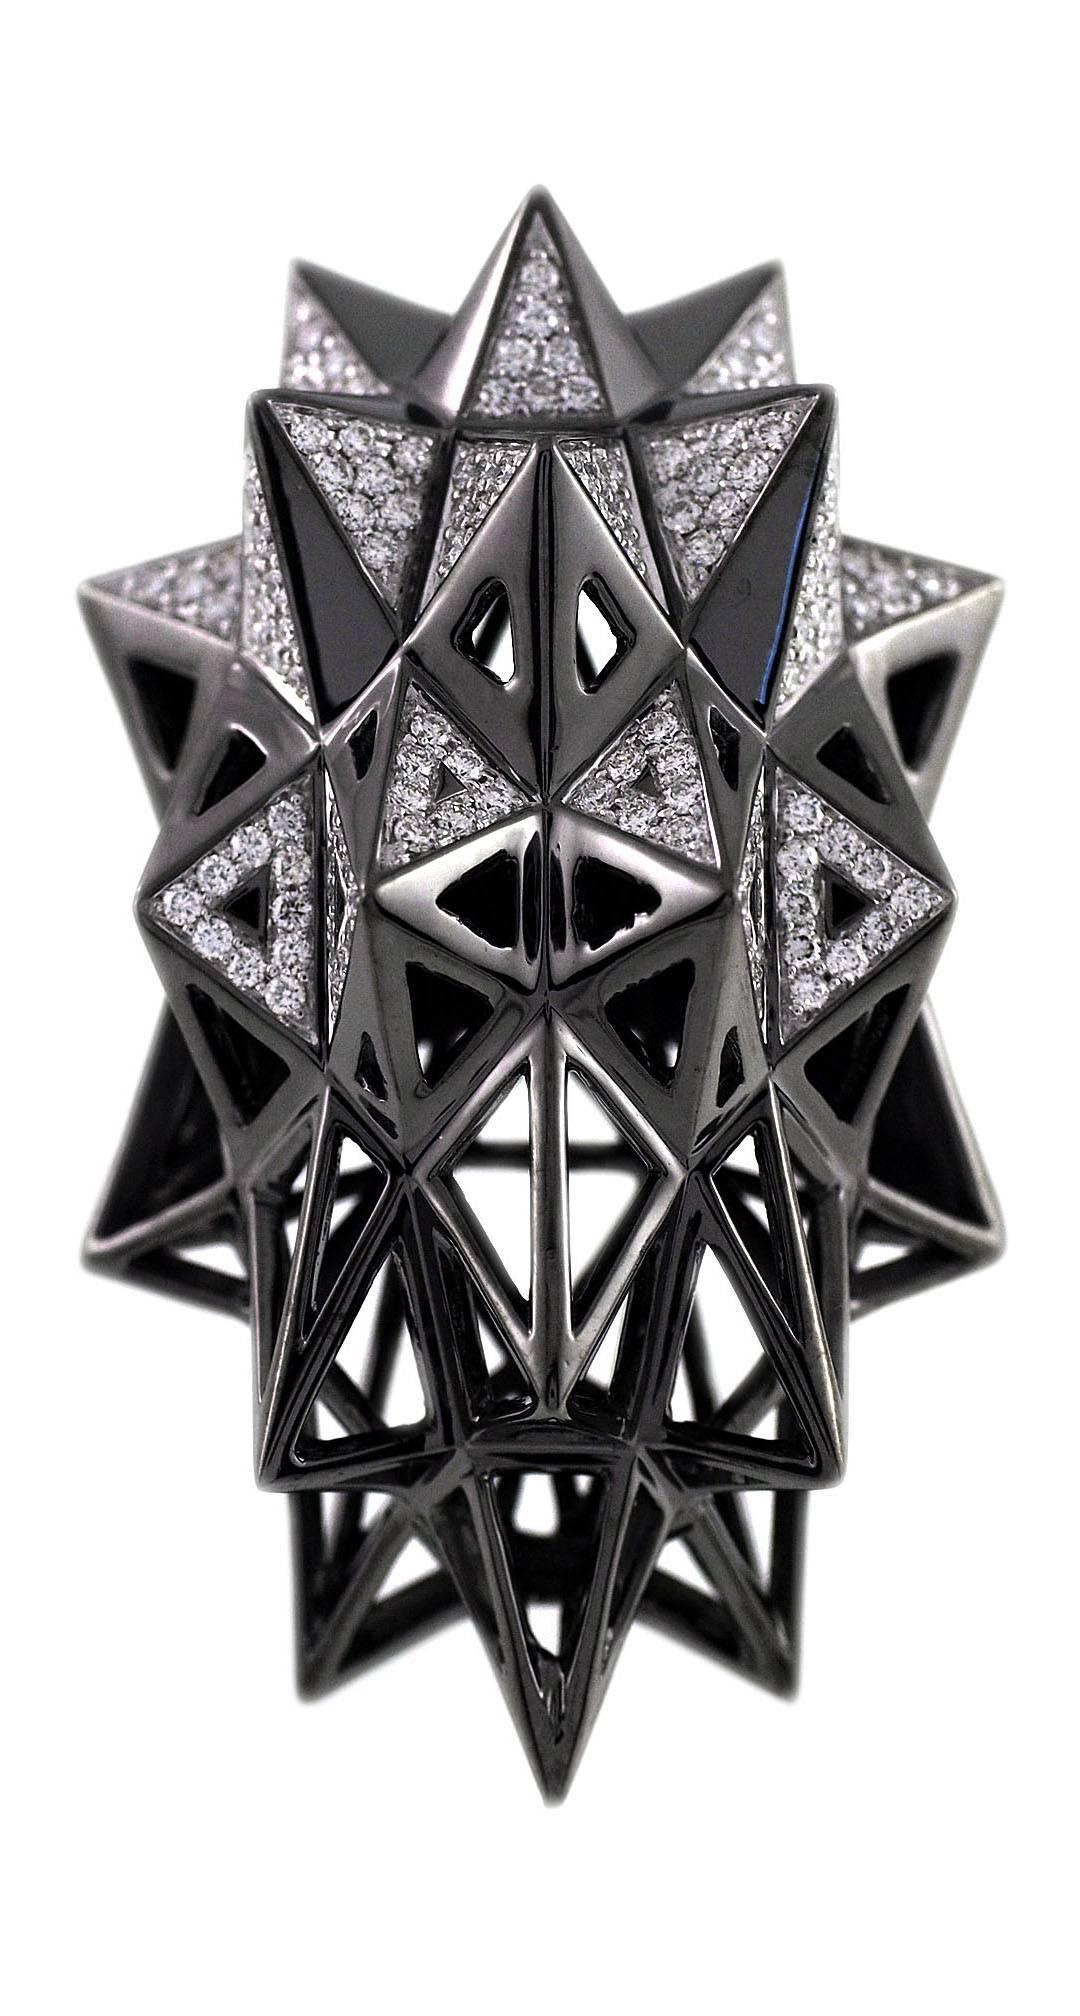 This one-of-a-kind ruthenium-plated, 18K white gold stellated star ring is an embodiment of monumental power and strength. This piece was designed to evoke personal power and protection. This ring is part of designer John Brevard’s Verahedra